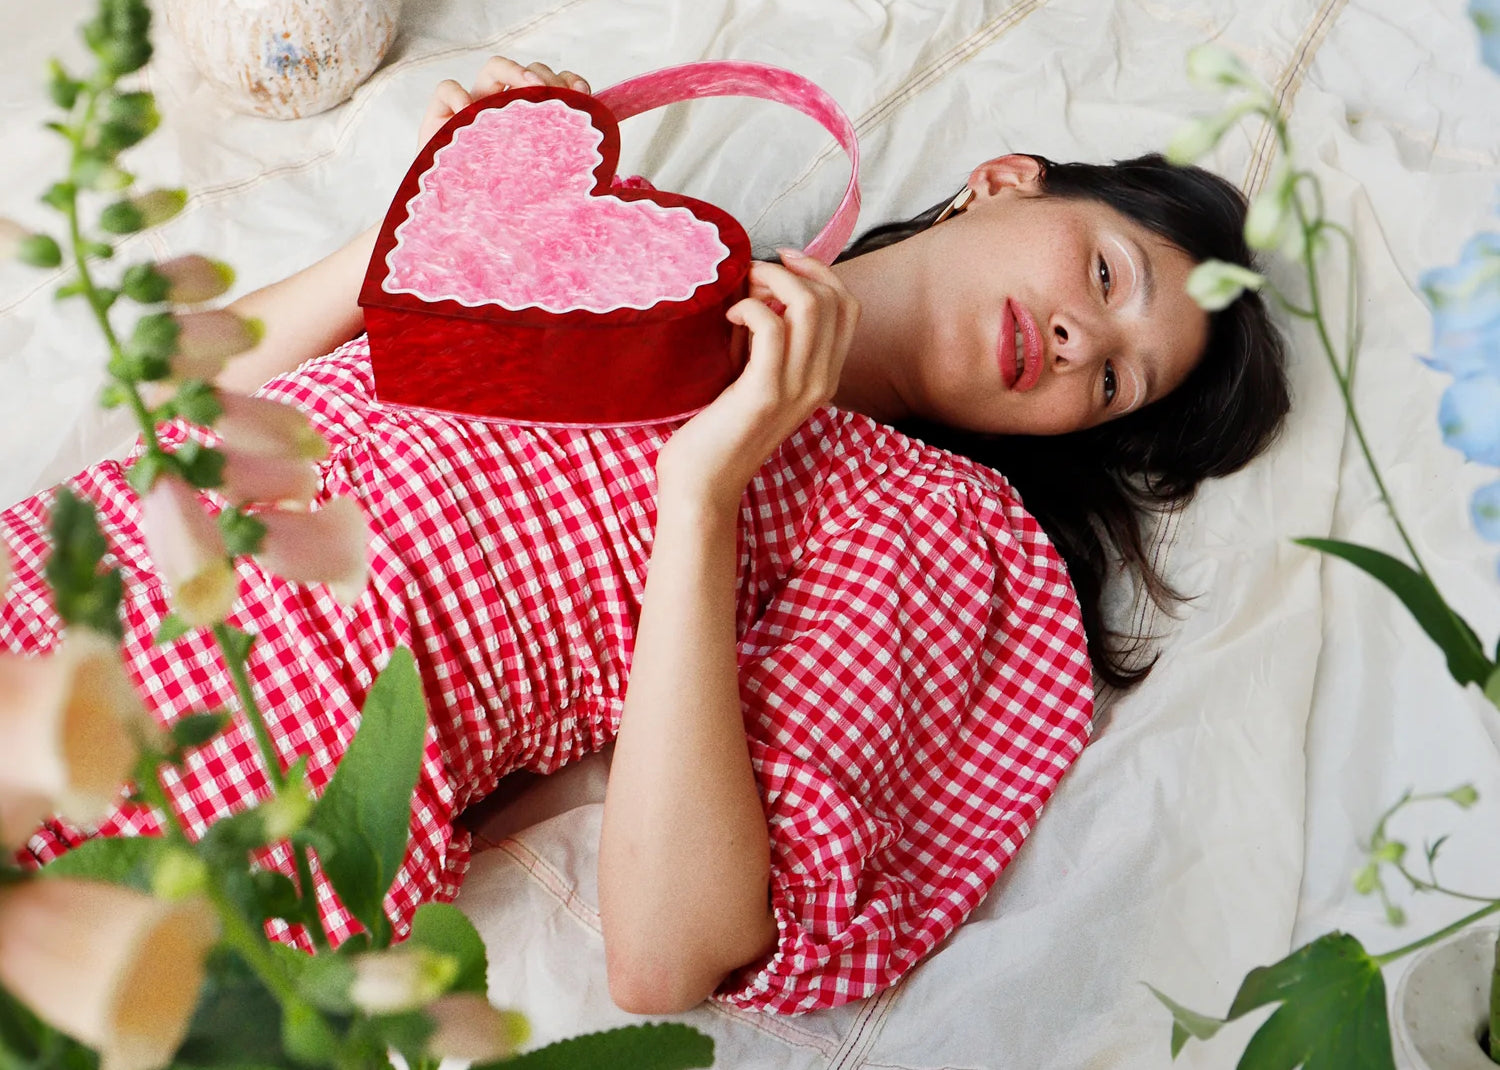 A woman in a red gingham dress lies on the floor holding a heart shaped purse